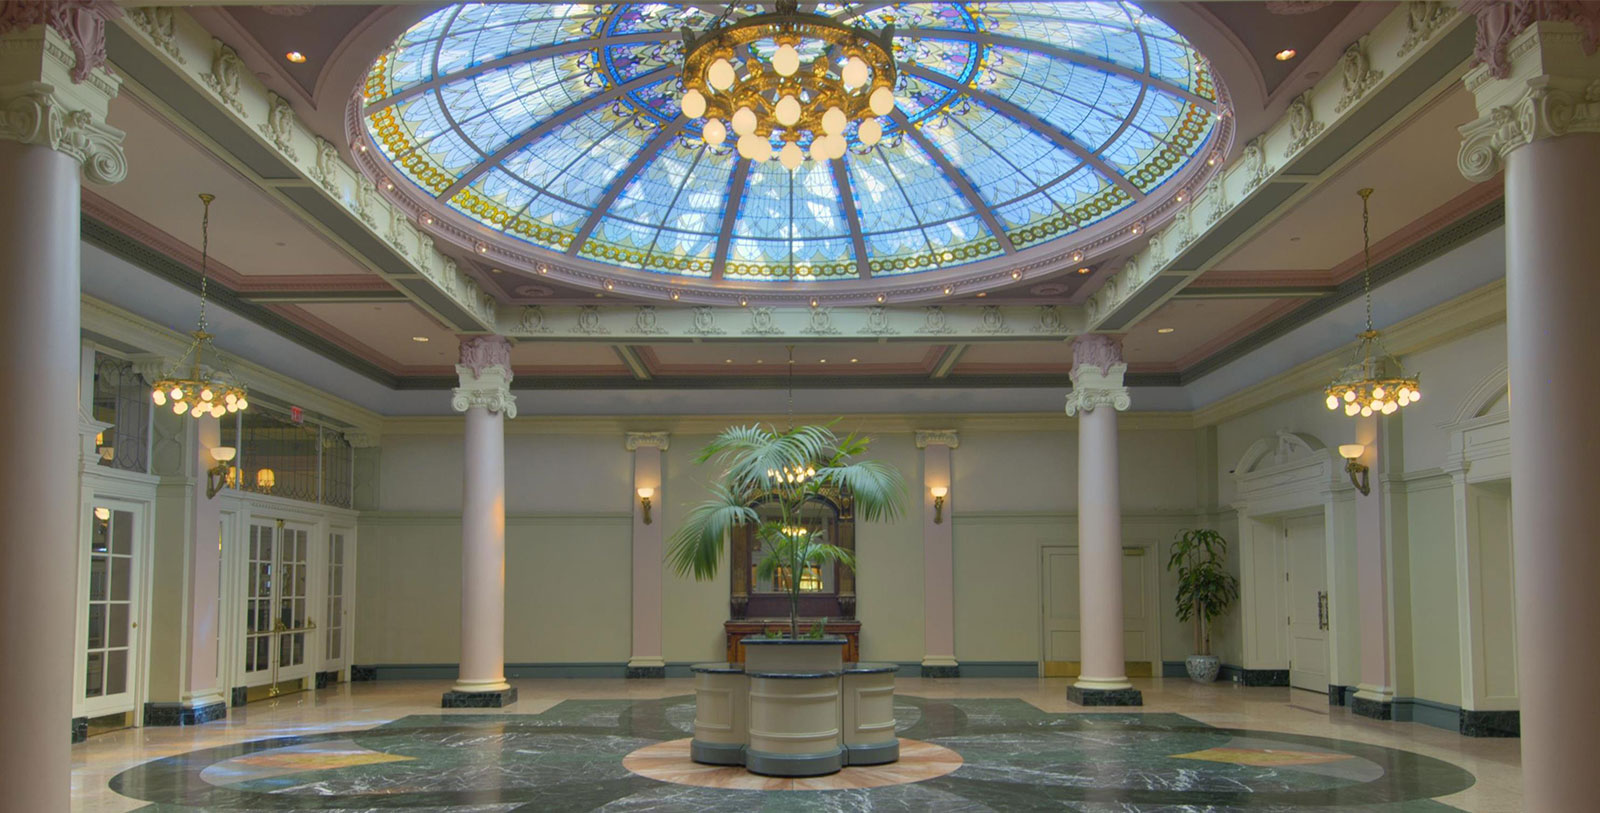 Image of Palm Court, Fairmont Empress, 1908, Member of Historic Hotels Worldwide, in Victoria, British Columbia, Canada, Experience